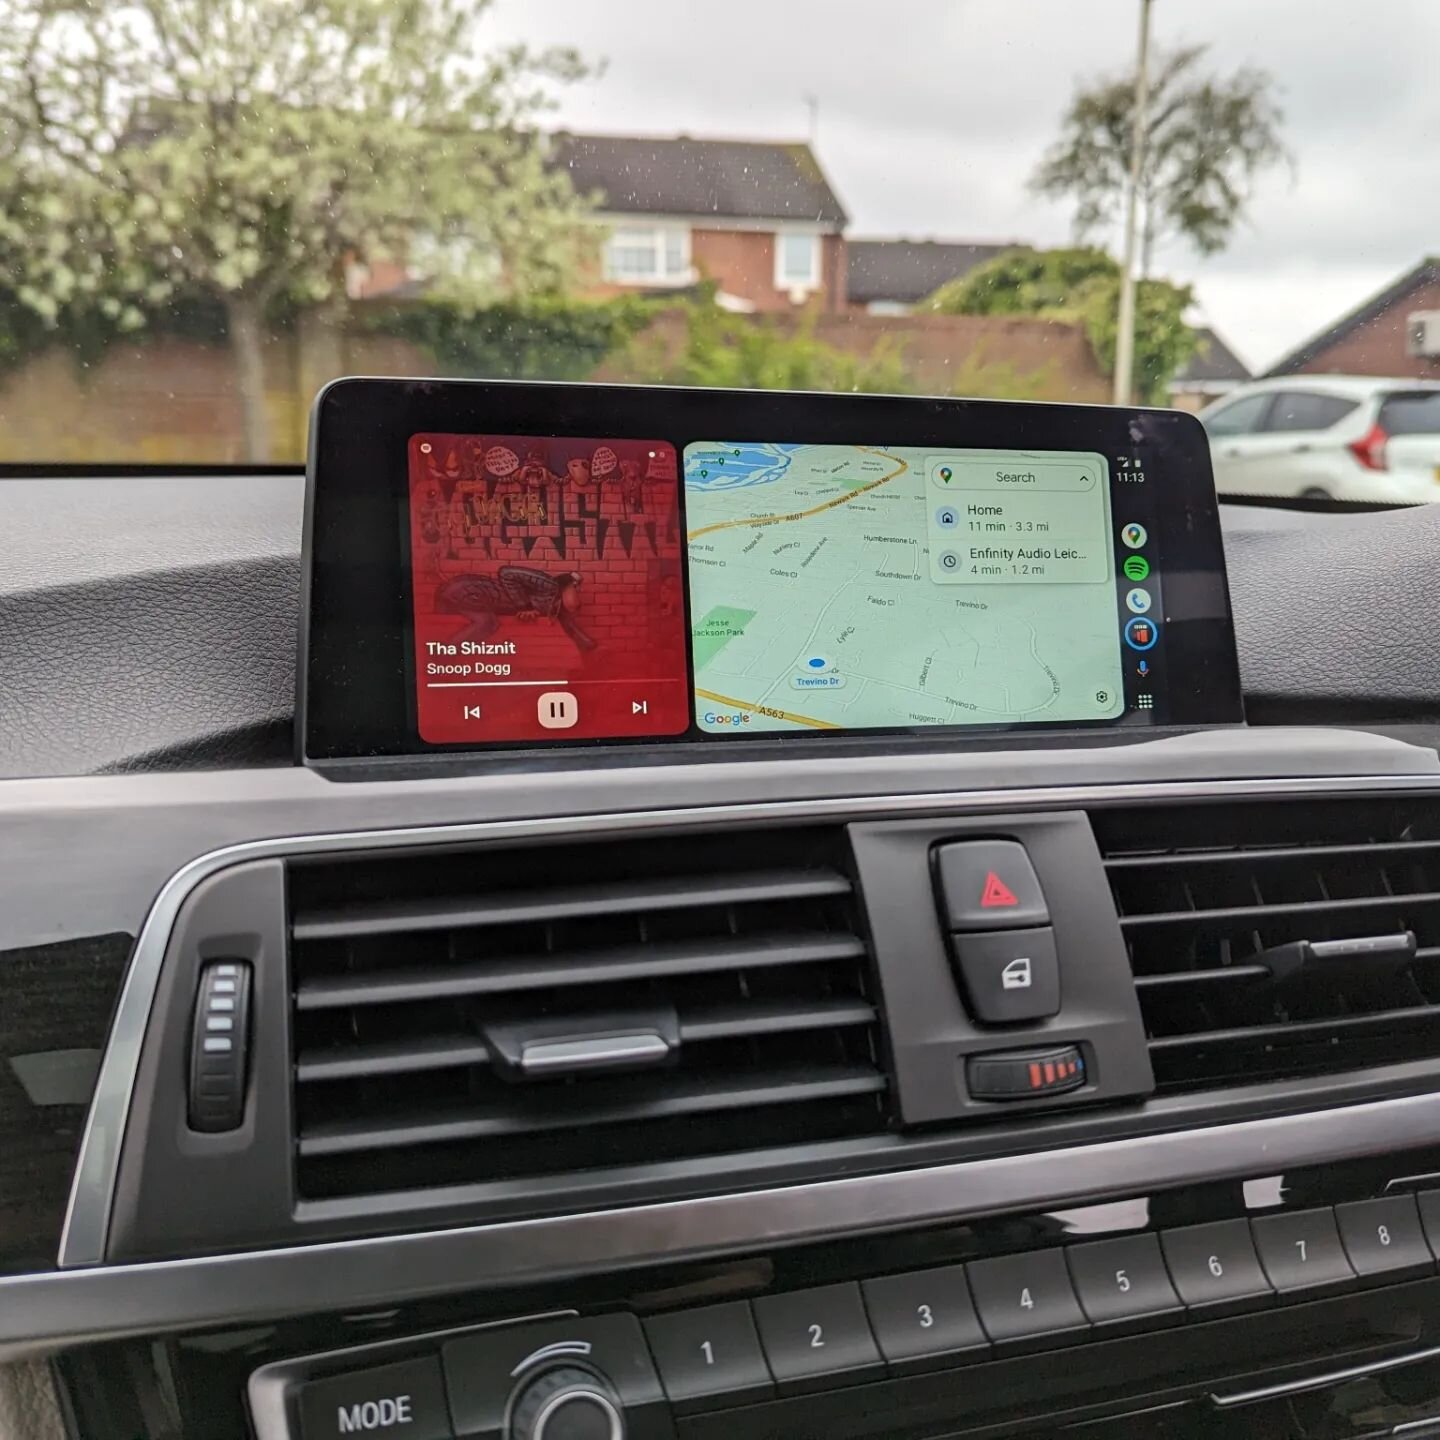 BMW 335D Estate, with Pro Nav, in for an MMI to give him Android Auto.

Apple Carplay 🍎
Android Auto 📱
Reverse Camera 📷
Screen Mirroring 🖥️
Video Playback 🎦
USB Media ▶️

#applecarplay #androidauto #caraudio #caraudioleicester #leicestercarscene